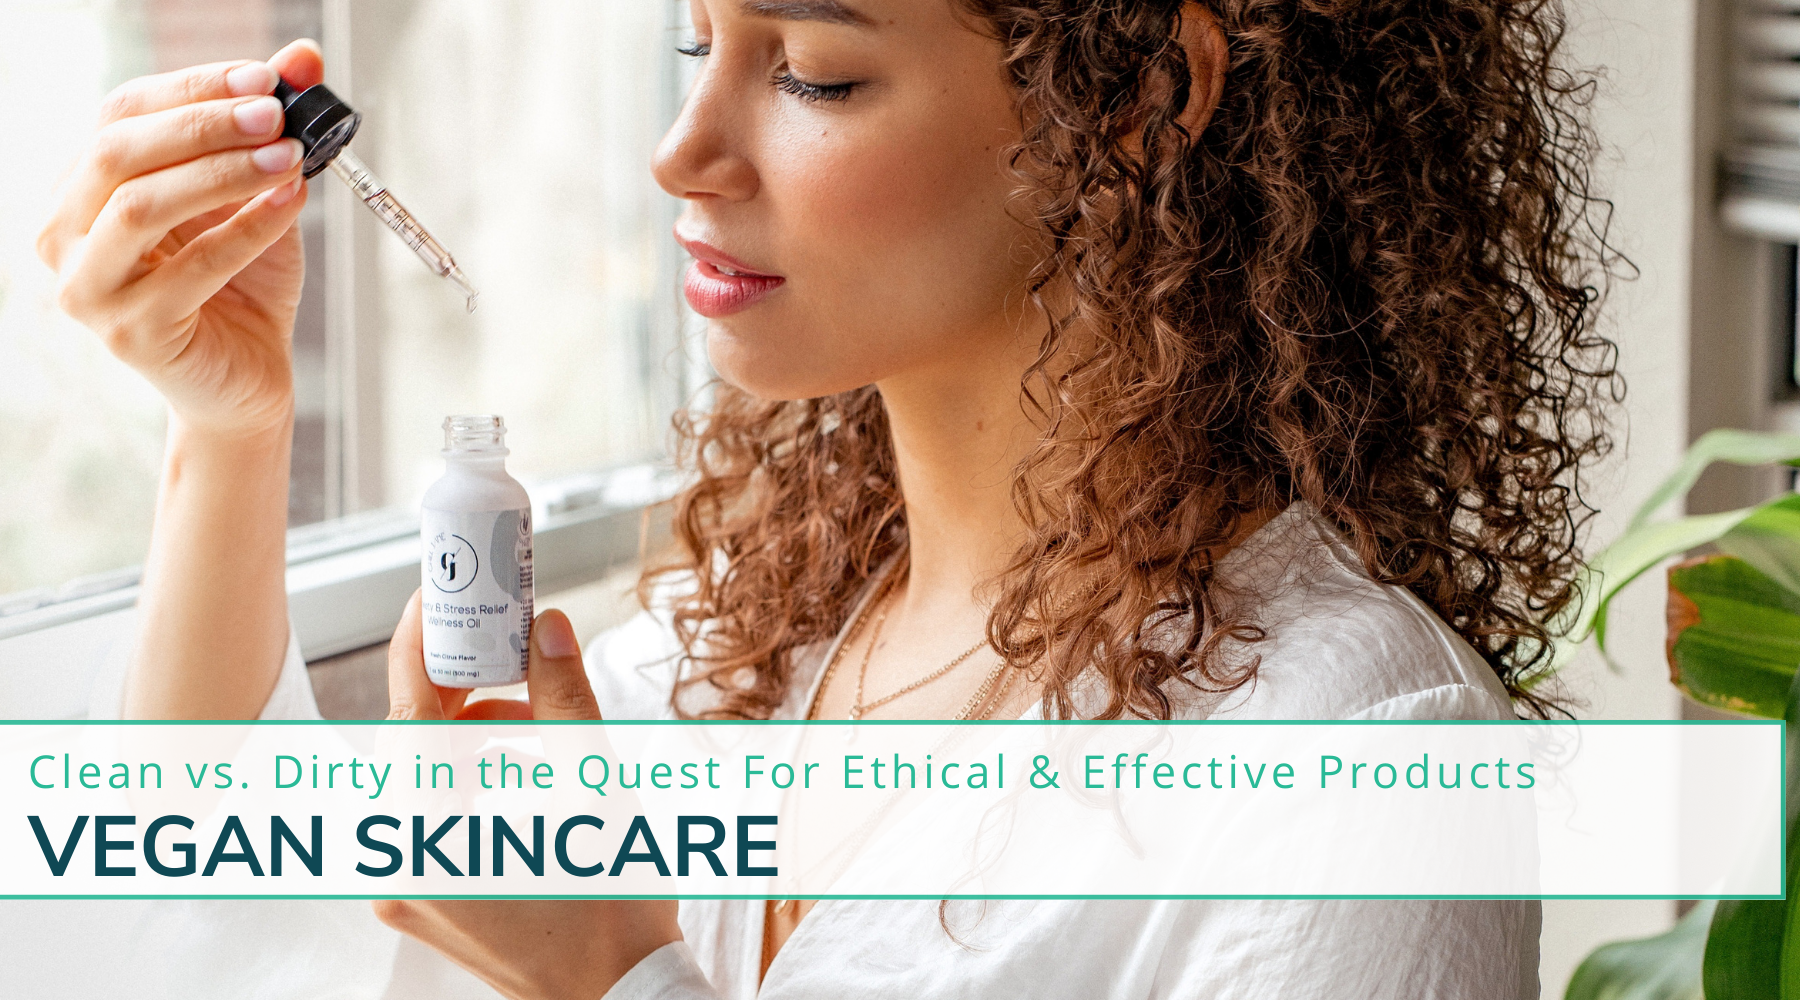 Vegan Skincare: Clean vs. Dirty in the Quest for Ethical & Effective Products